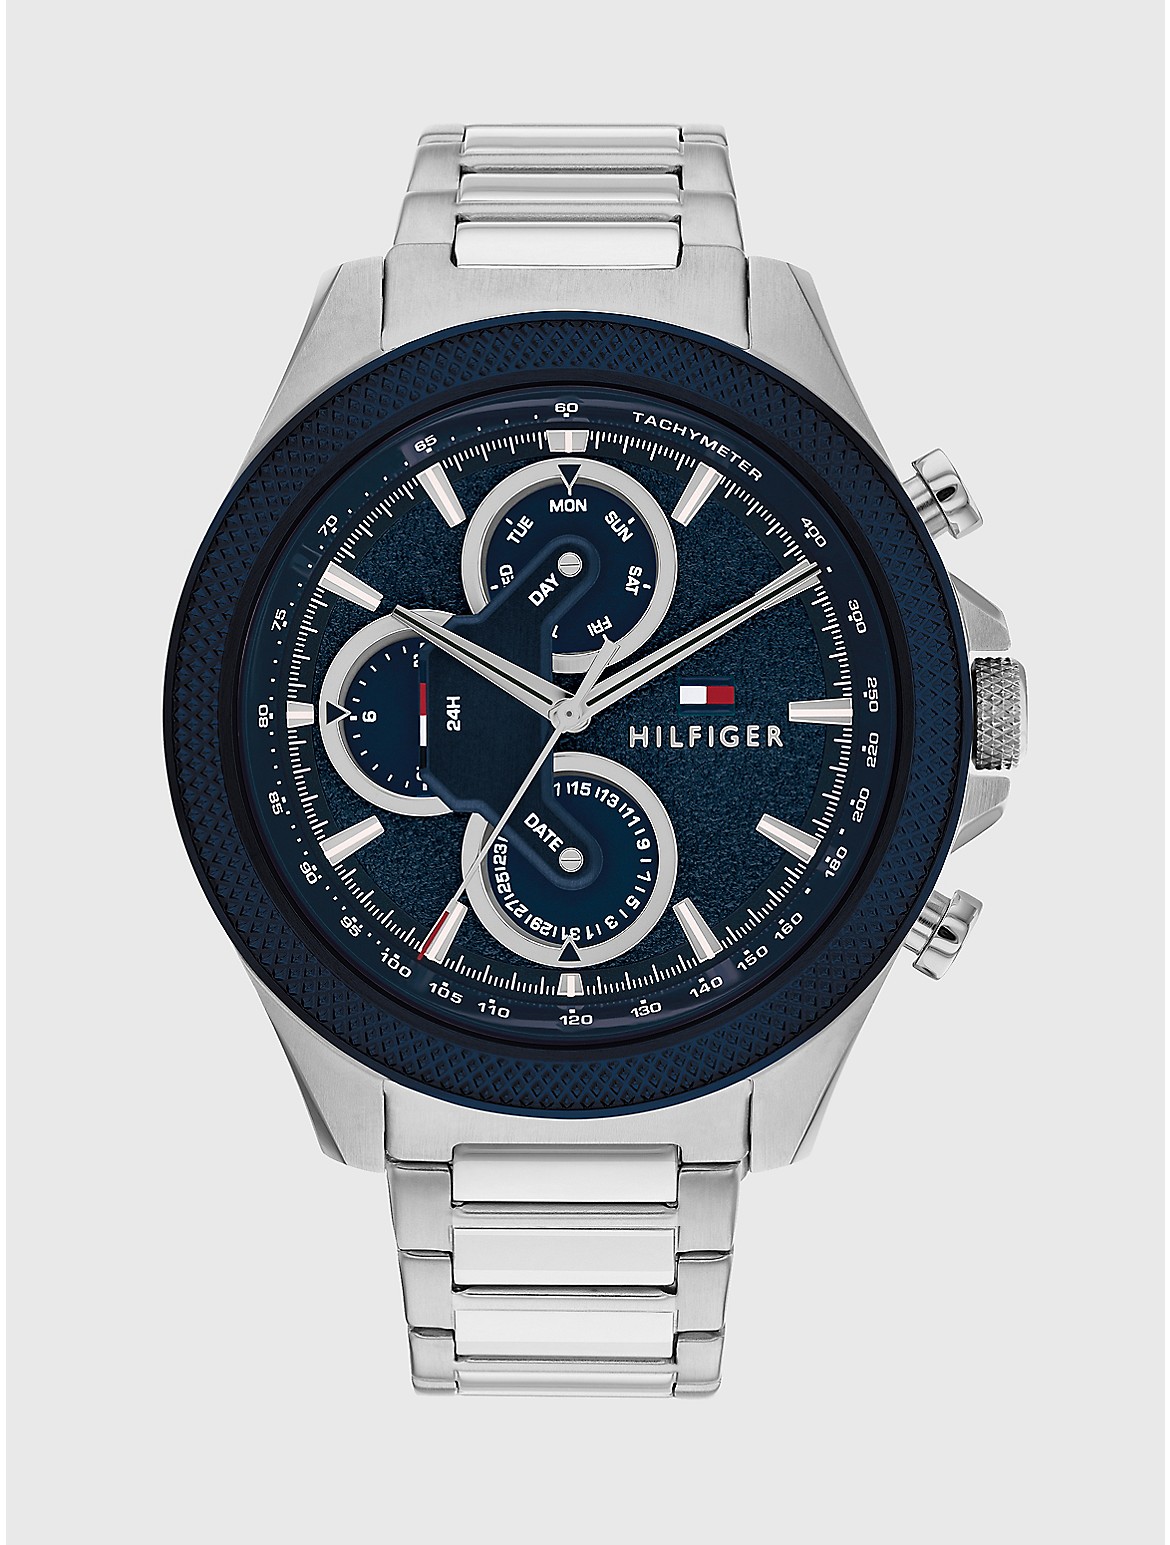 TOMMY HILFIGER SPORT WATCH WITH STAINLESS STEEL BRACELET